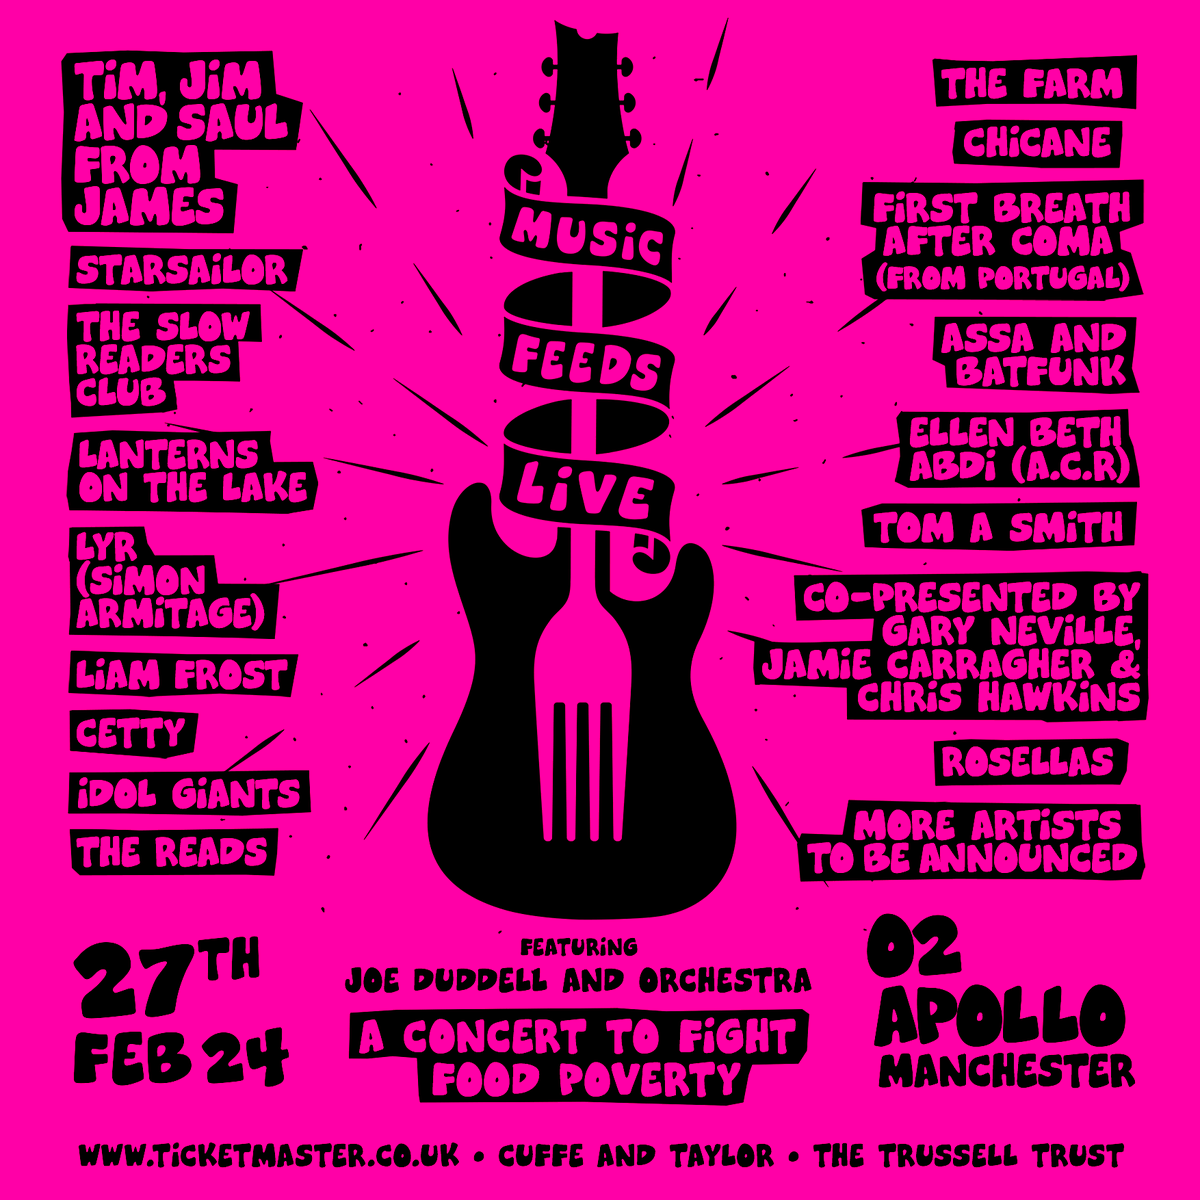 It’s February…. and you know what that means!

This month, we will see 16+ unique artists take the @O2ApolloManc stage to fight #foodpoverty!

Have you got your ticket? ticketmaster.co.uk/event/36005F86…

#MusicFeedsLive #ManchesterMusic